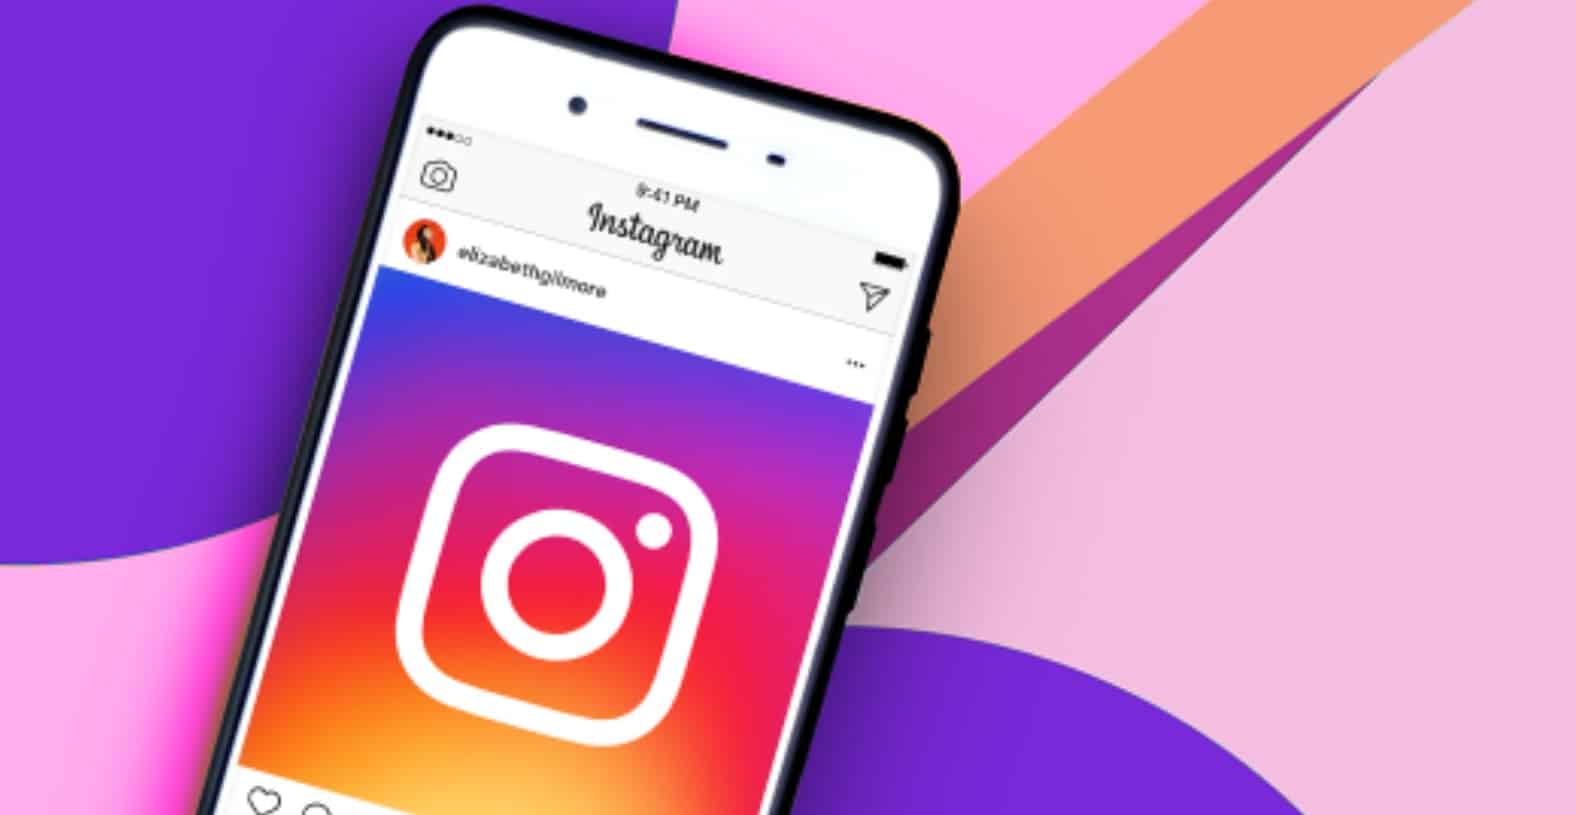 How to Send Disappearing Photos, Videos on Instagram in Europe Post New Regulation